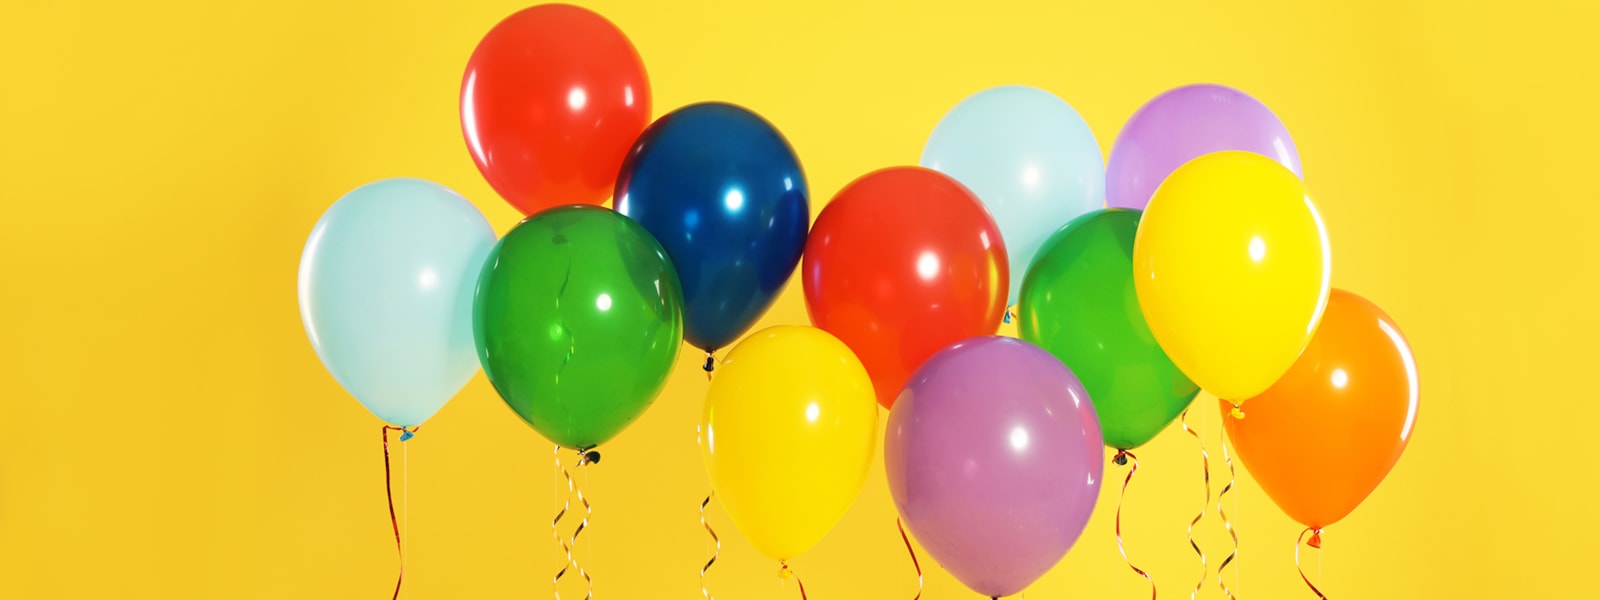 balloons on a yellow background